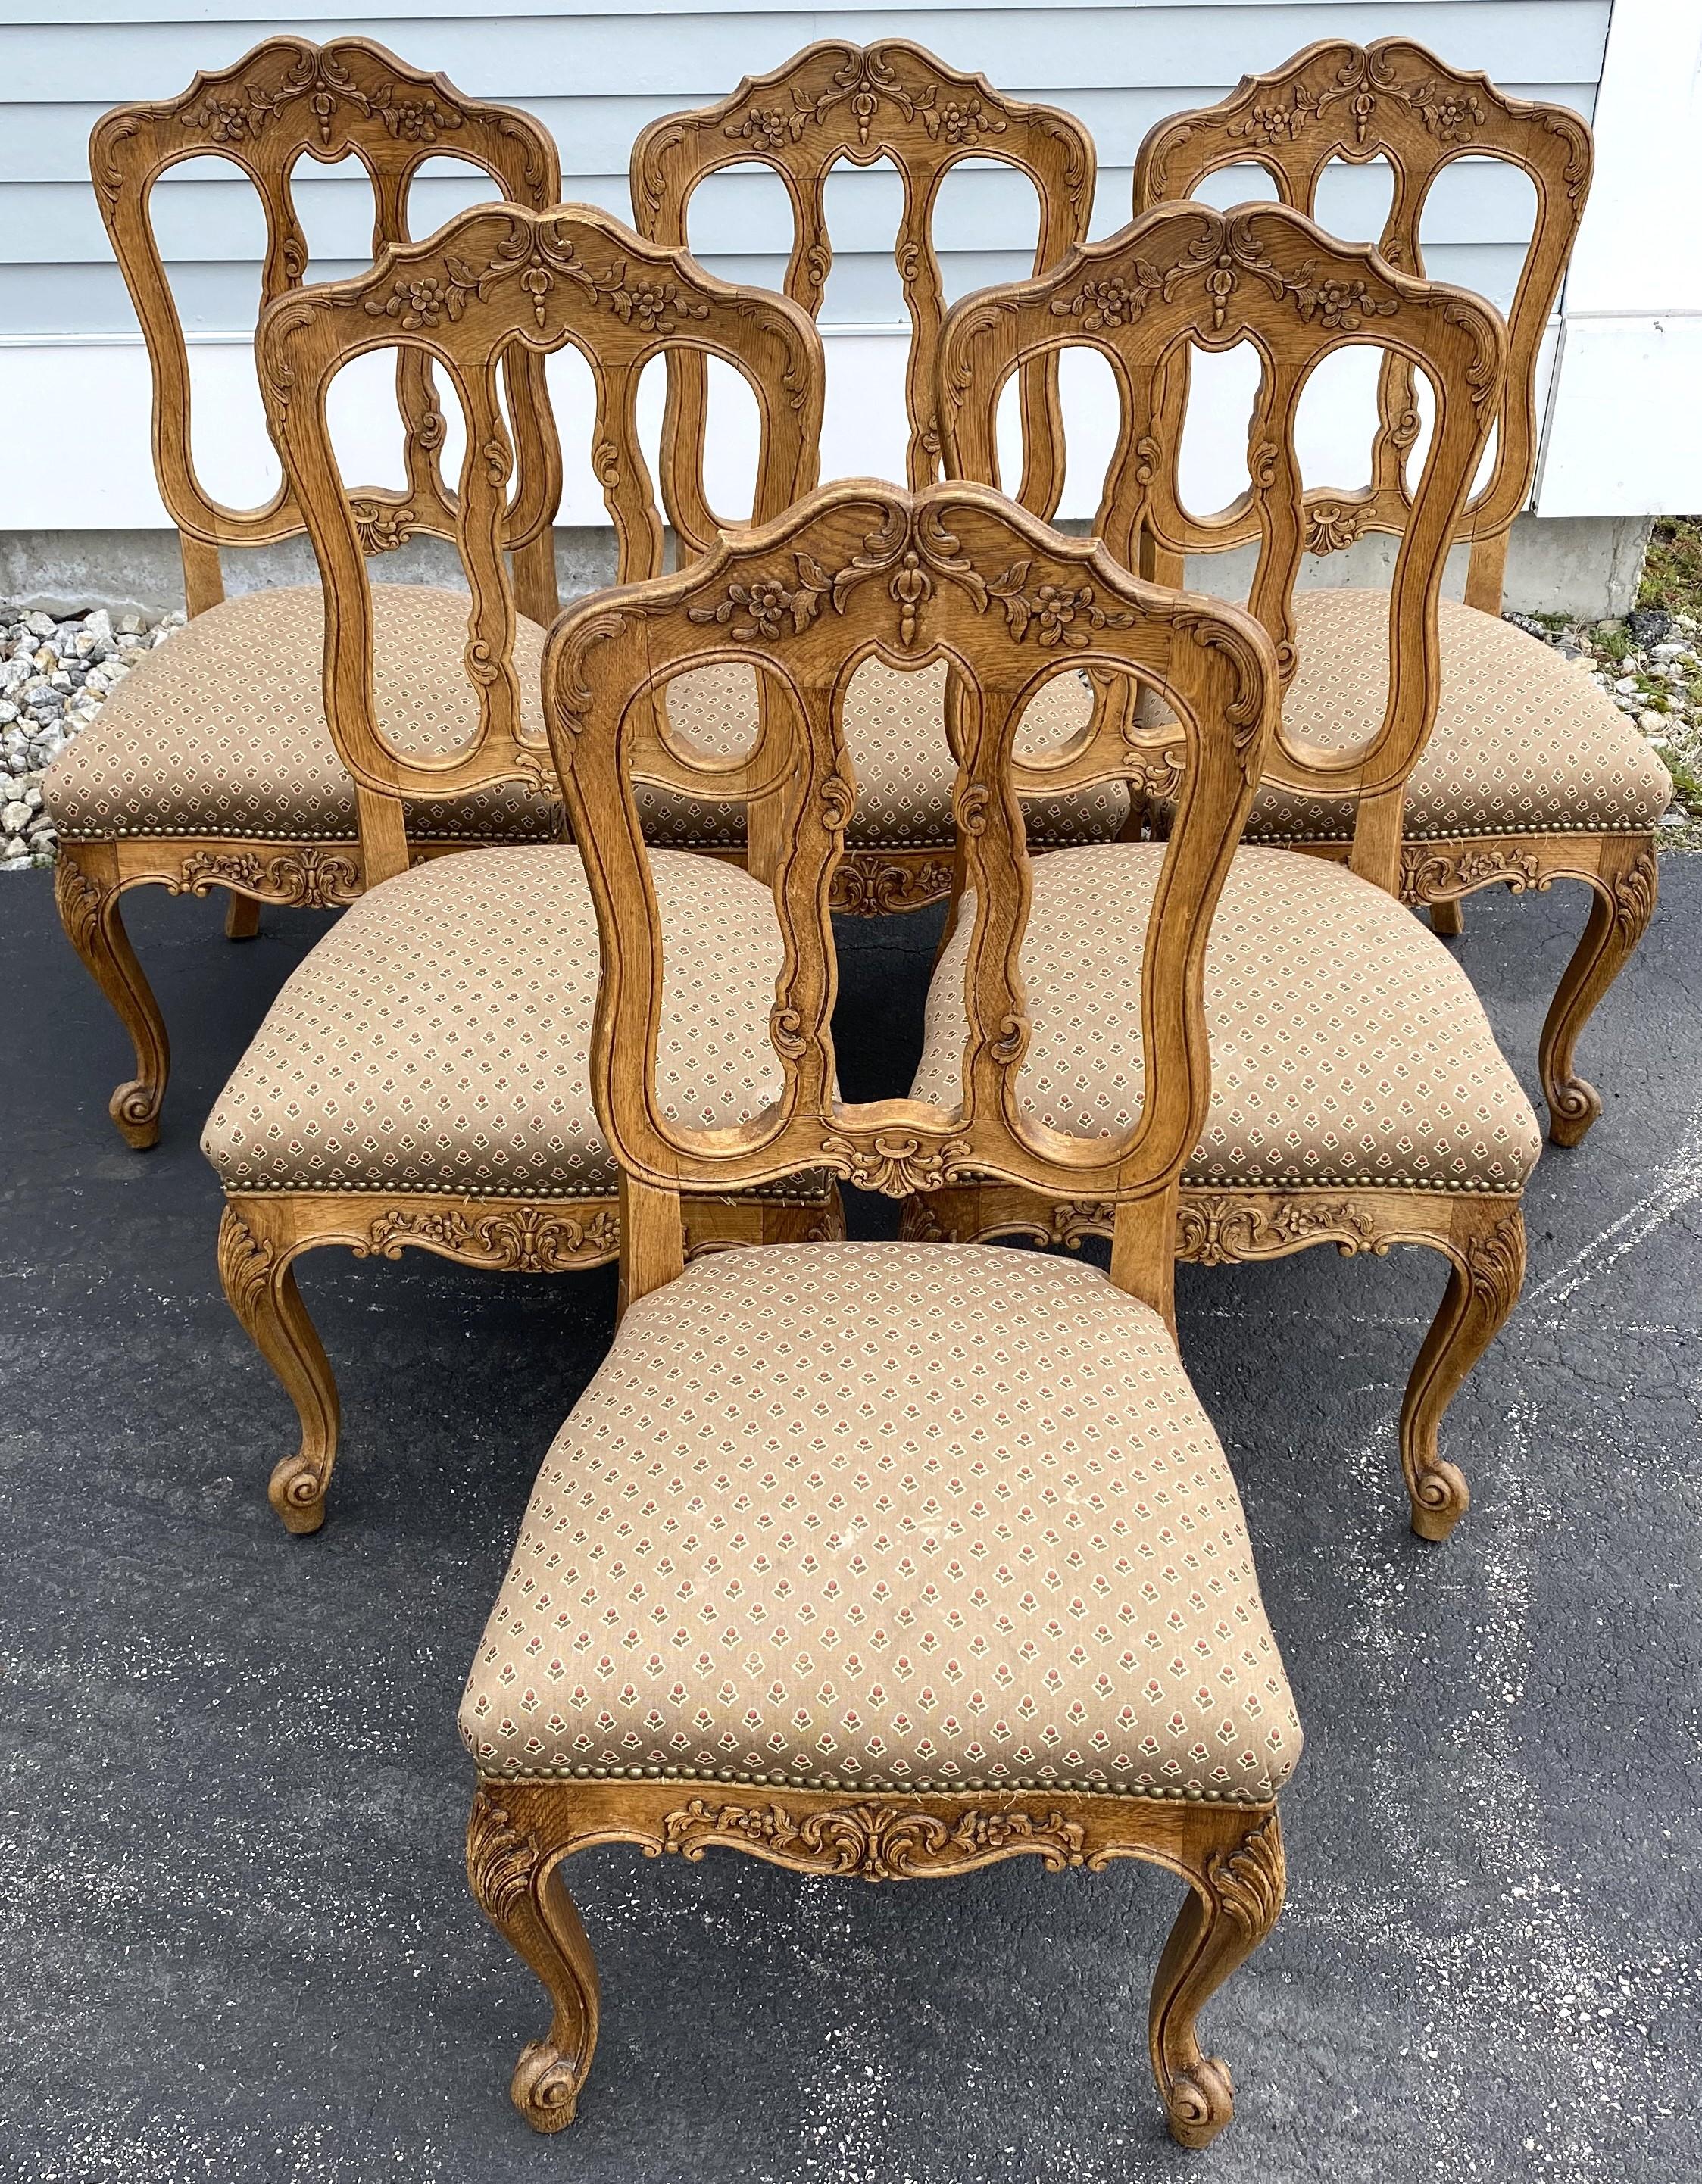 A fine sturdy set of six Louis XV style scrollwork and foliate carved oak dining chairs with foliate upholstery. The set dates to the late 19th century and is in very good overall condition, with some minor upholstery spots, minor surface wear to